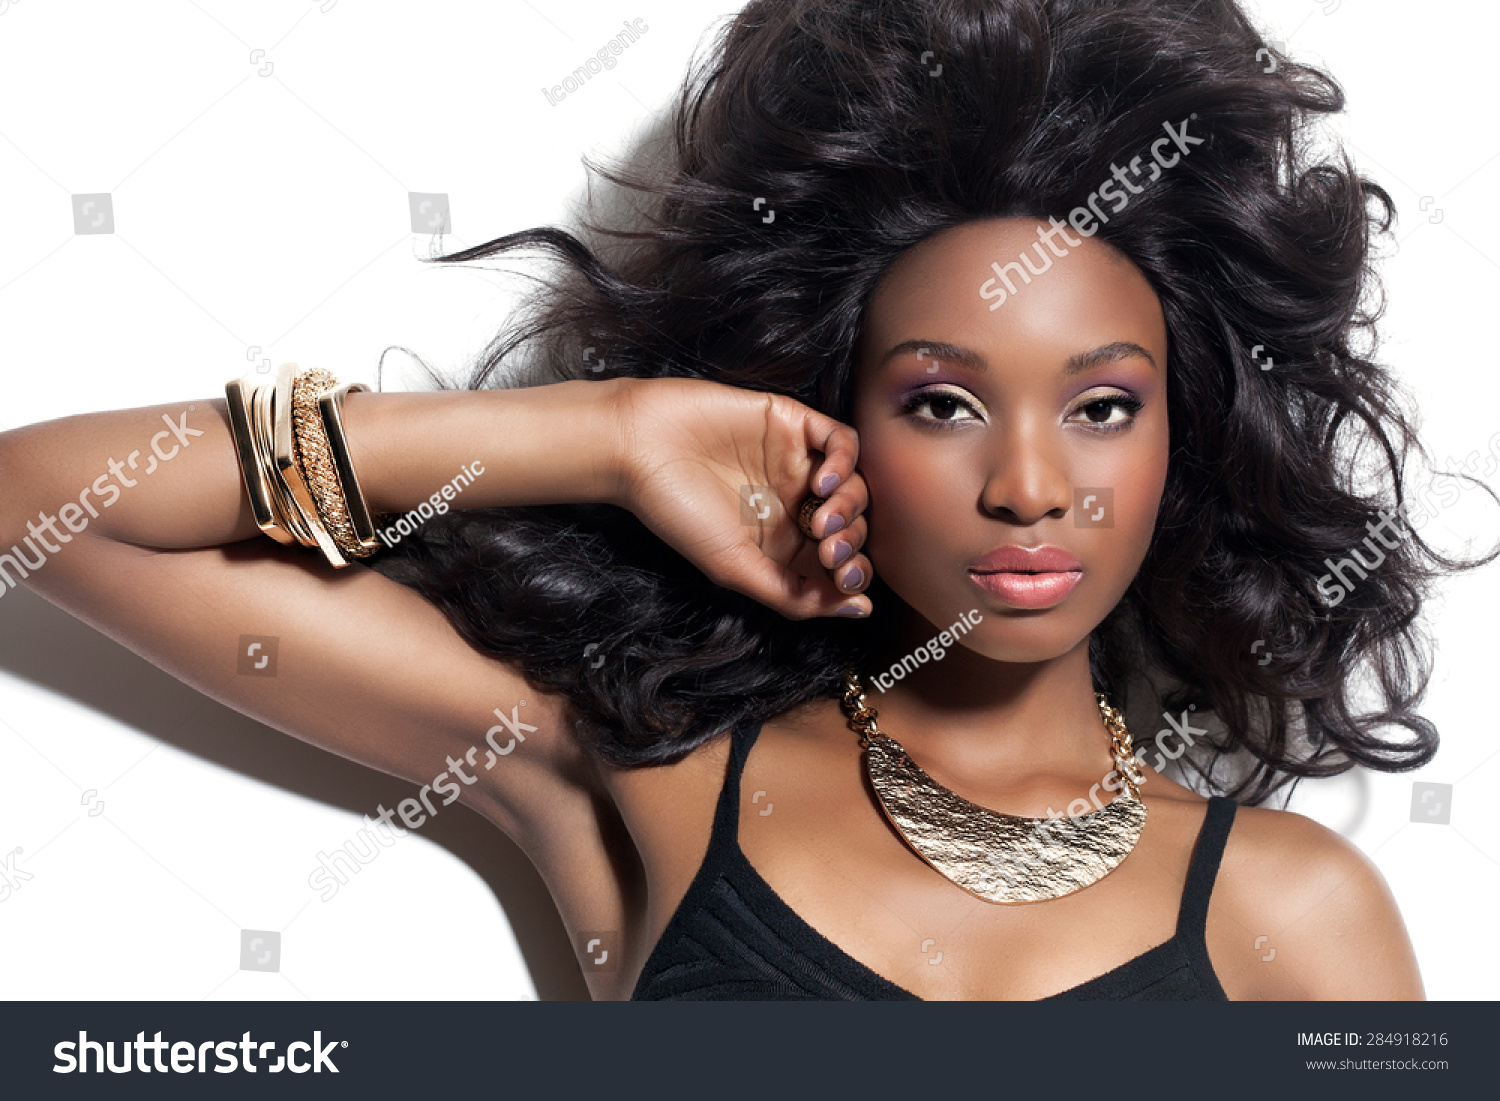 Beautiful African Fashion Model With Long Lush Hairstyle And Makeup ...